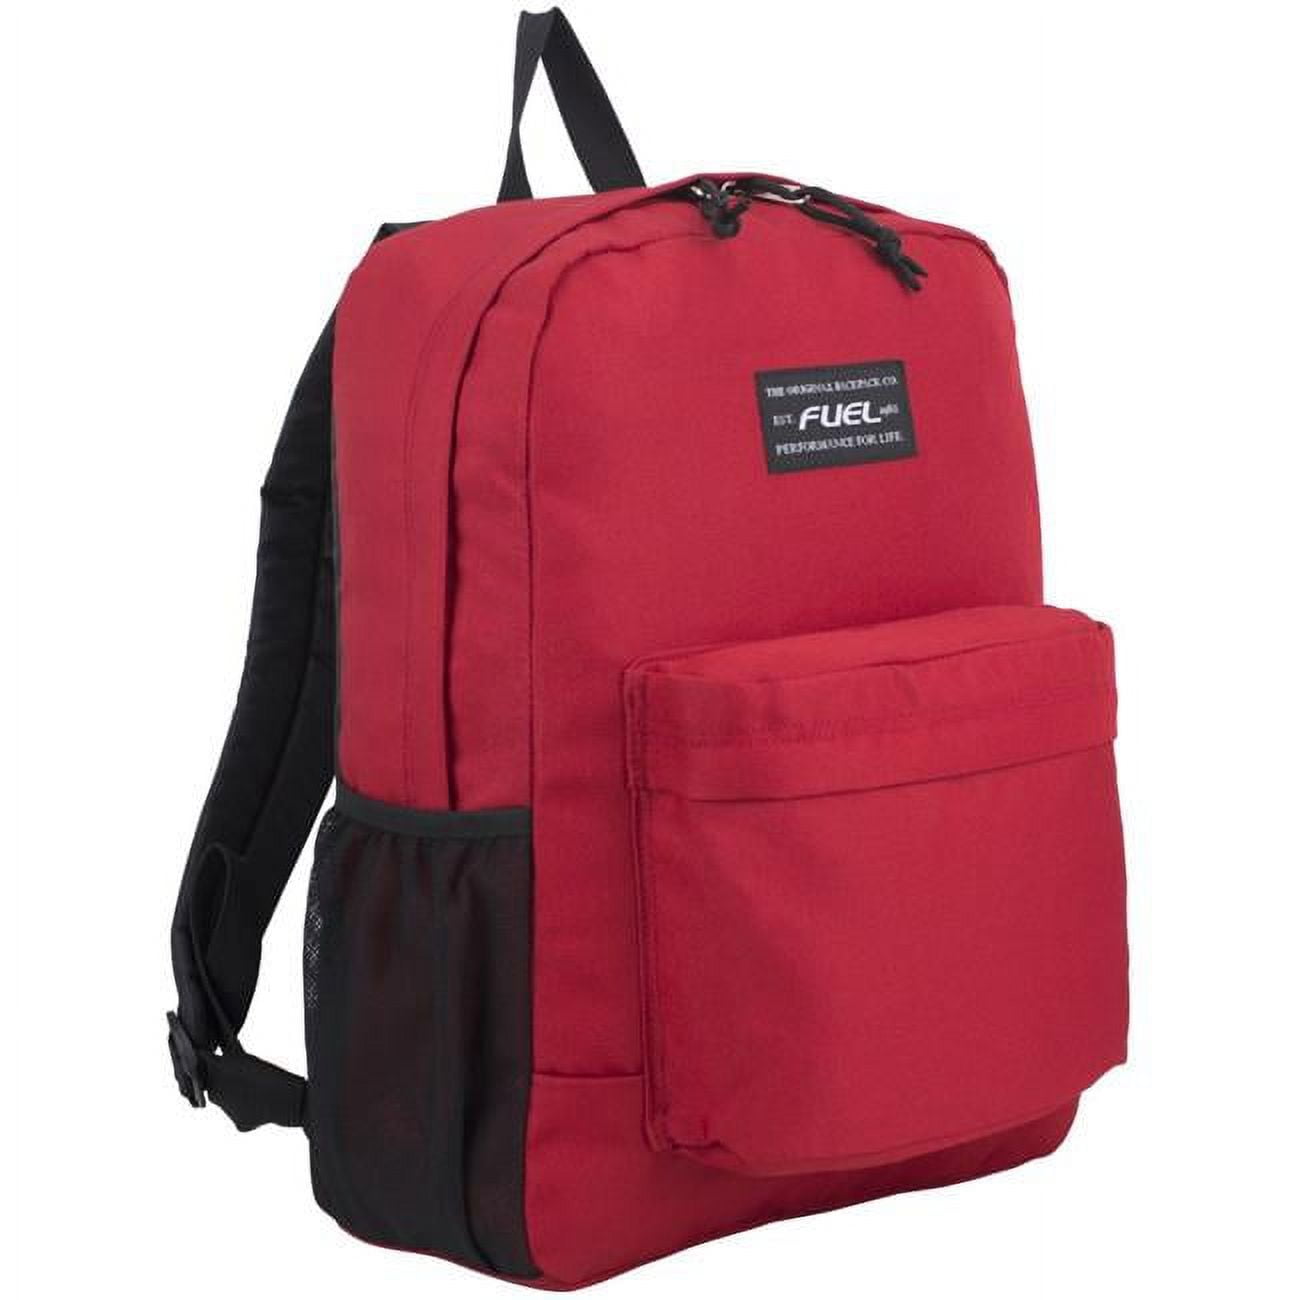 2317668 Cruise Backpack, Red - 12 Per Pack - Case Of 12